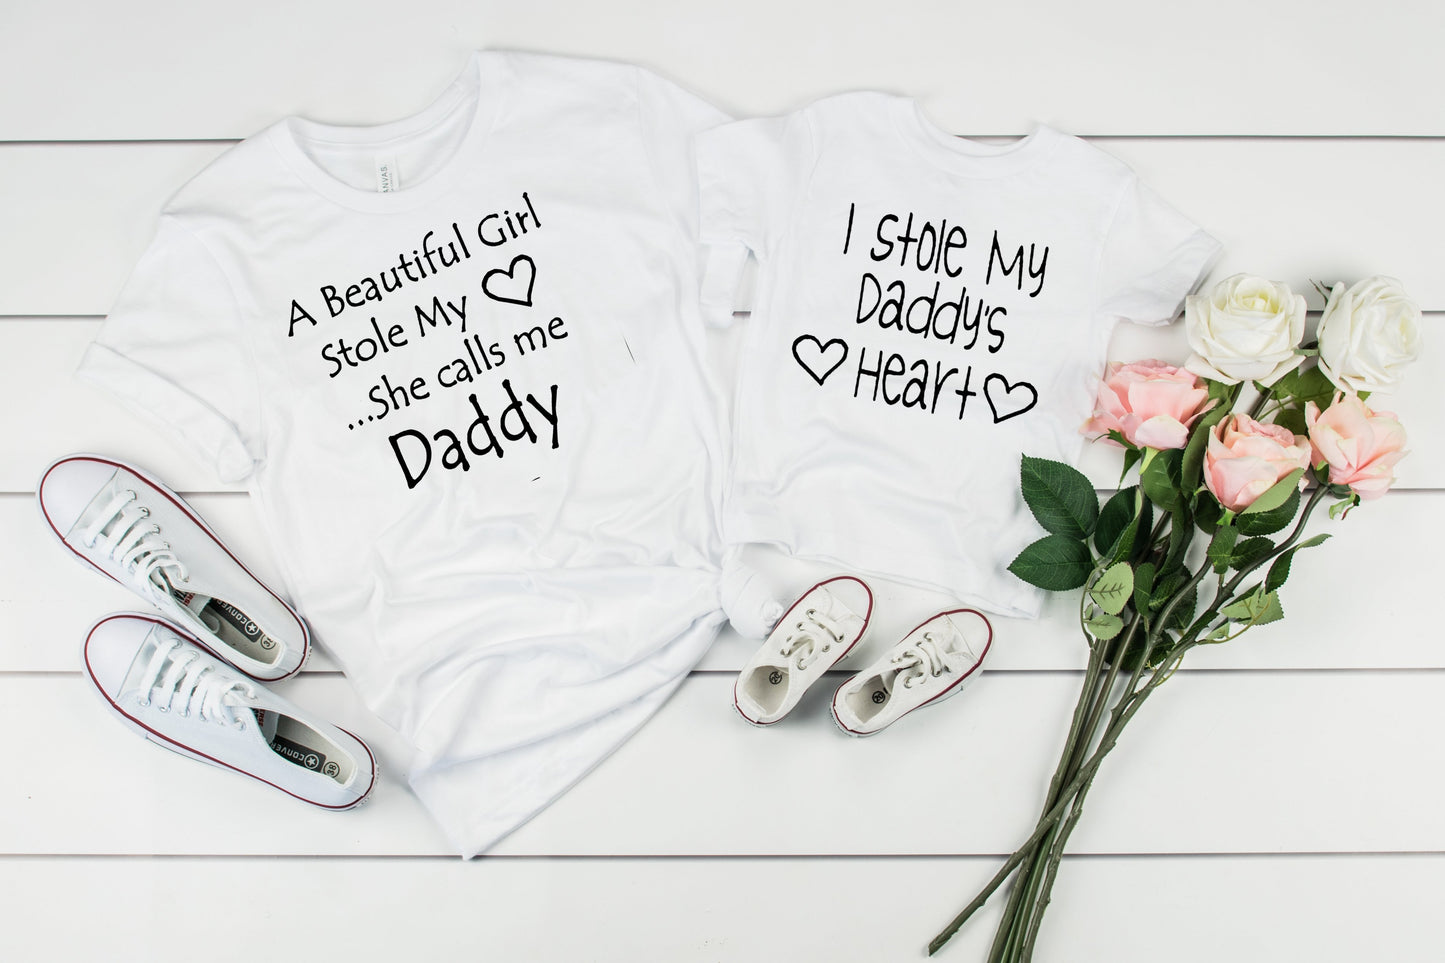 A Beautiful Girl Stole My Heart ... She Calls Me Daddy Graphic Tee Graphic Tee